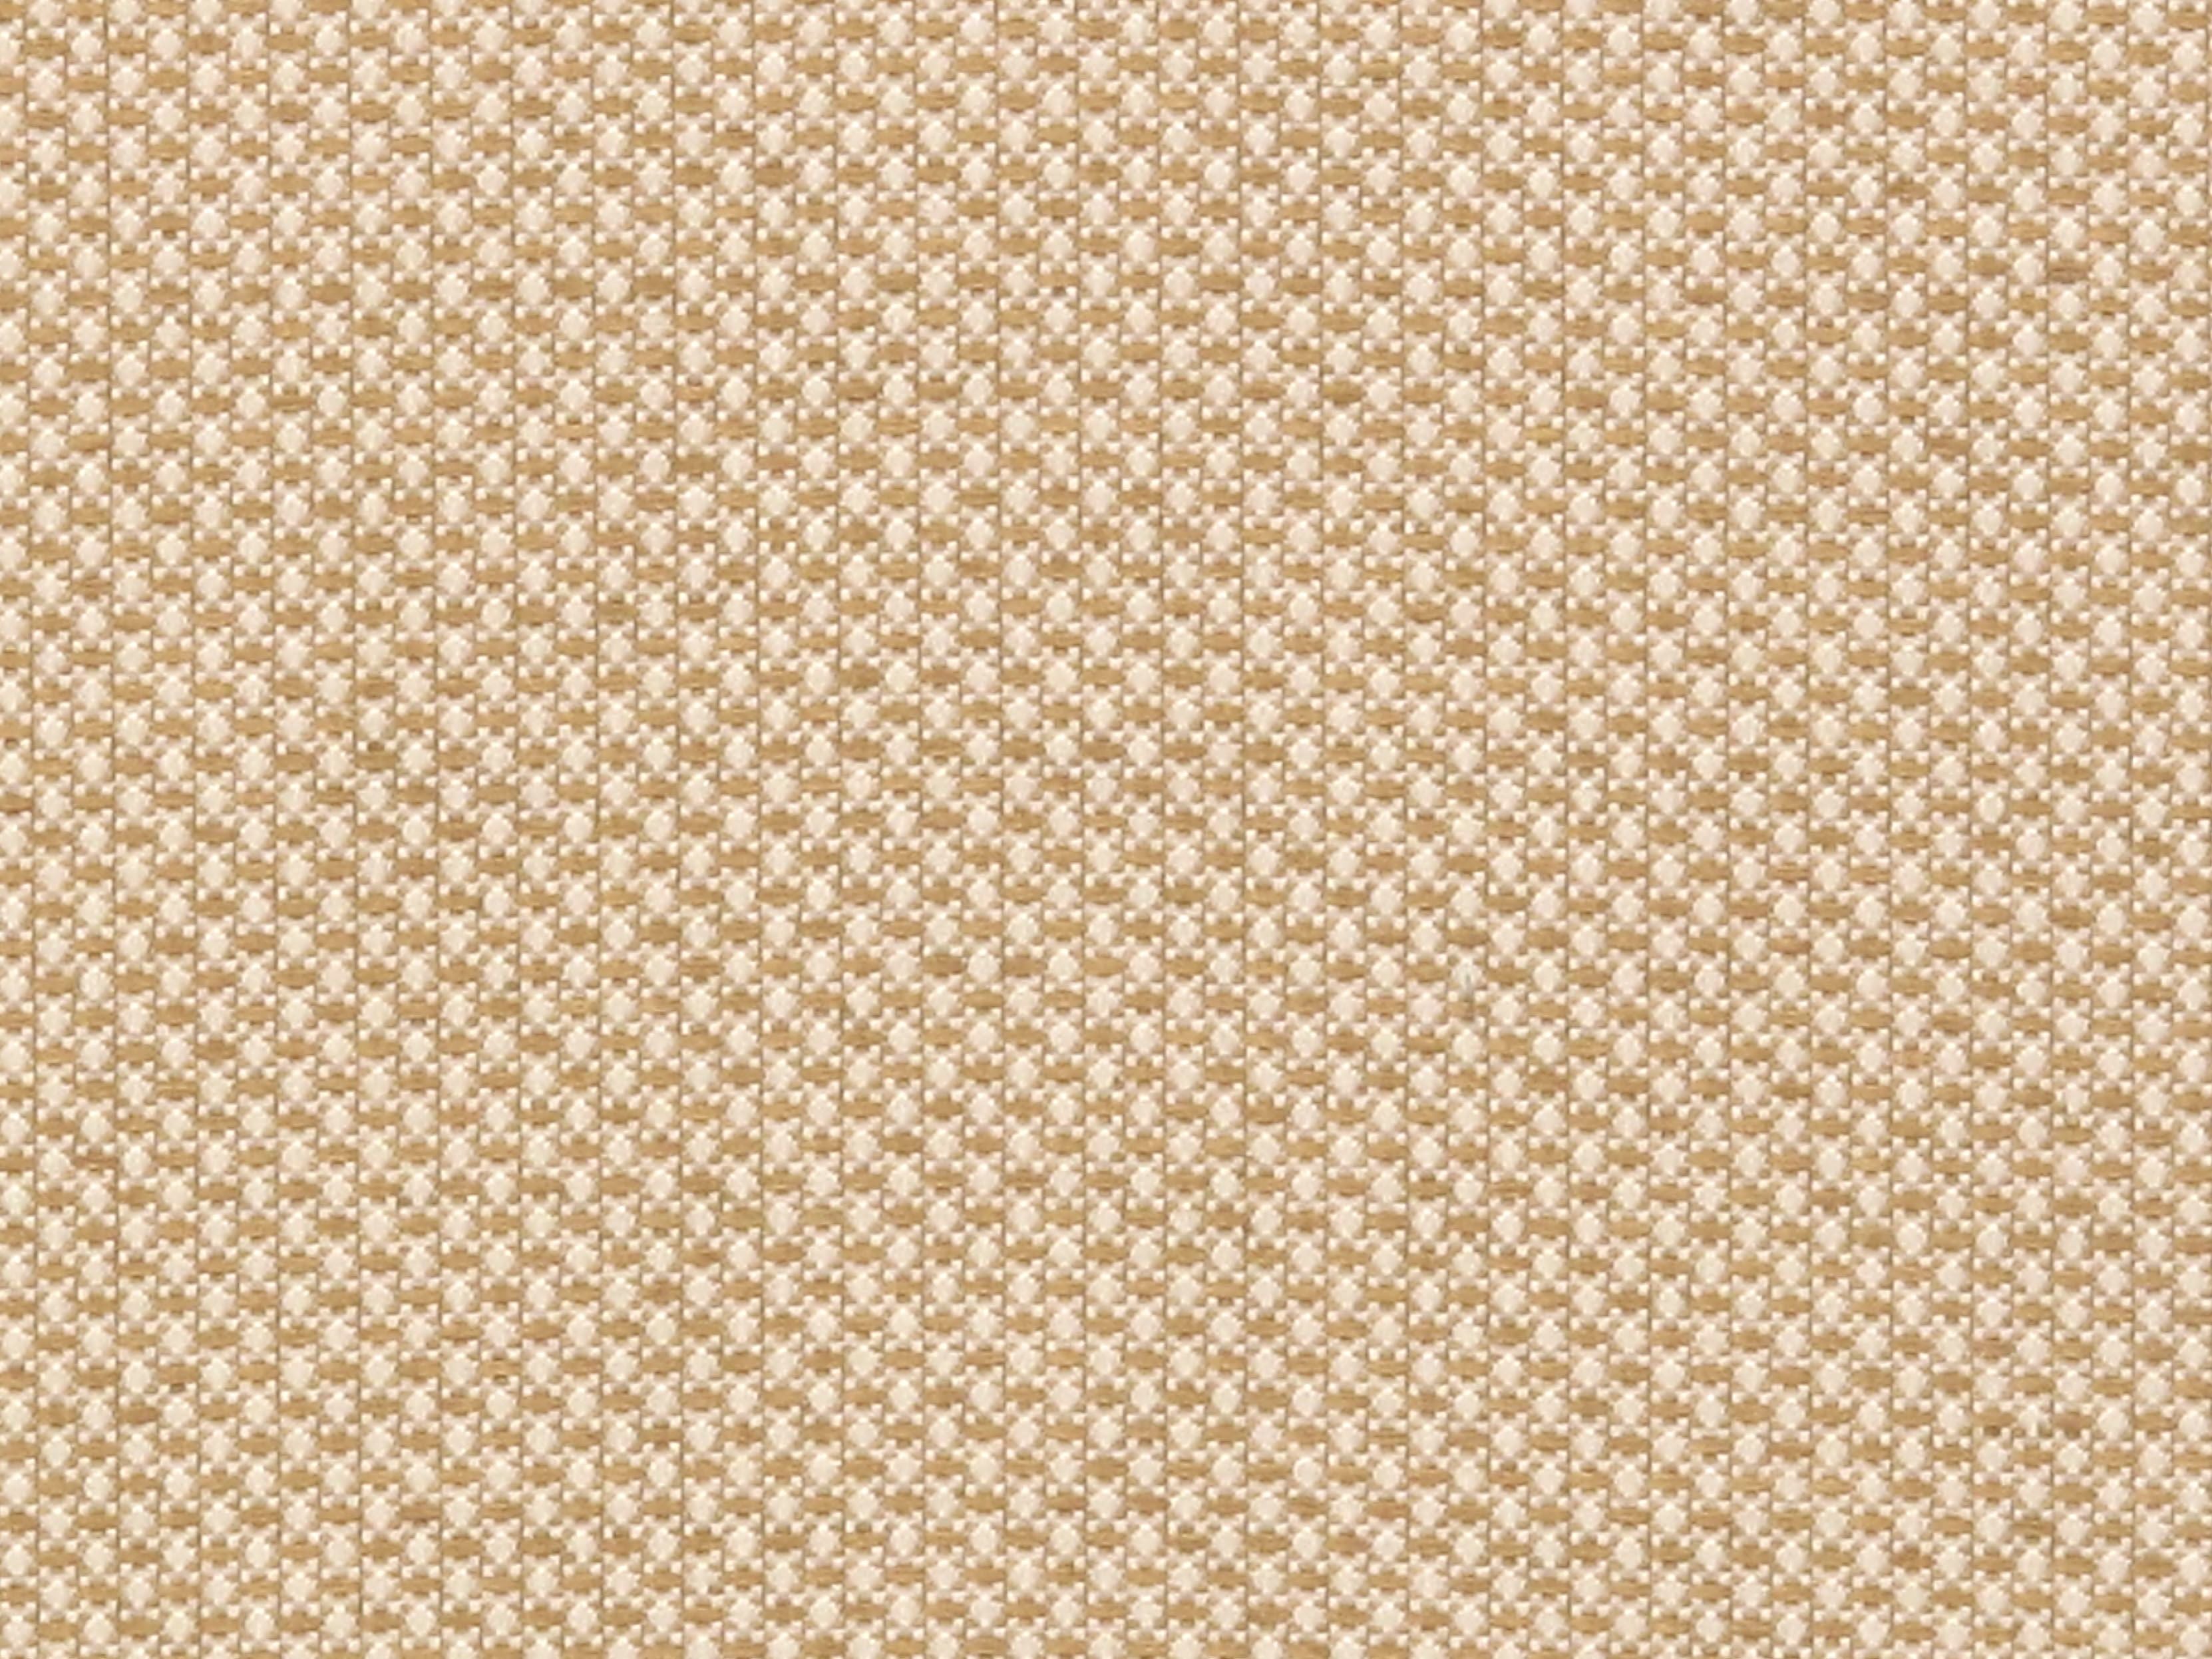 Mitchell fabric in light brown color - pattern number ZB 00041790 - by Scalamandre in the Old World Weavers collection